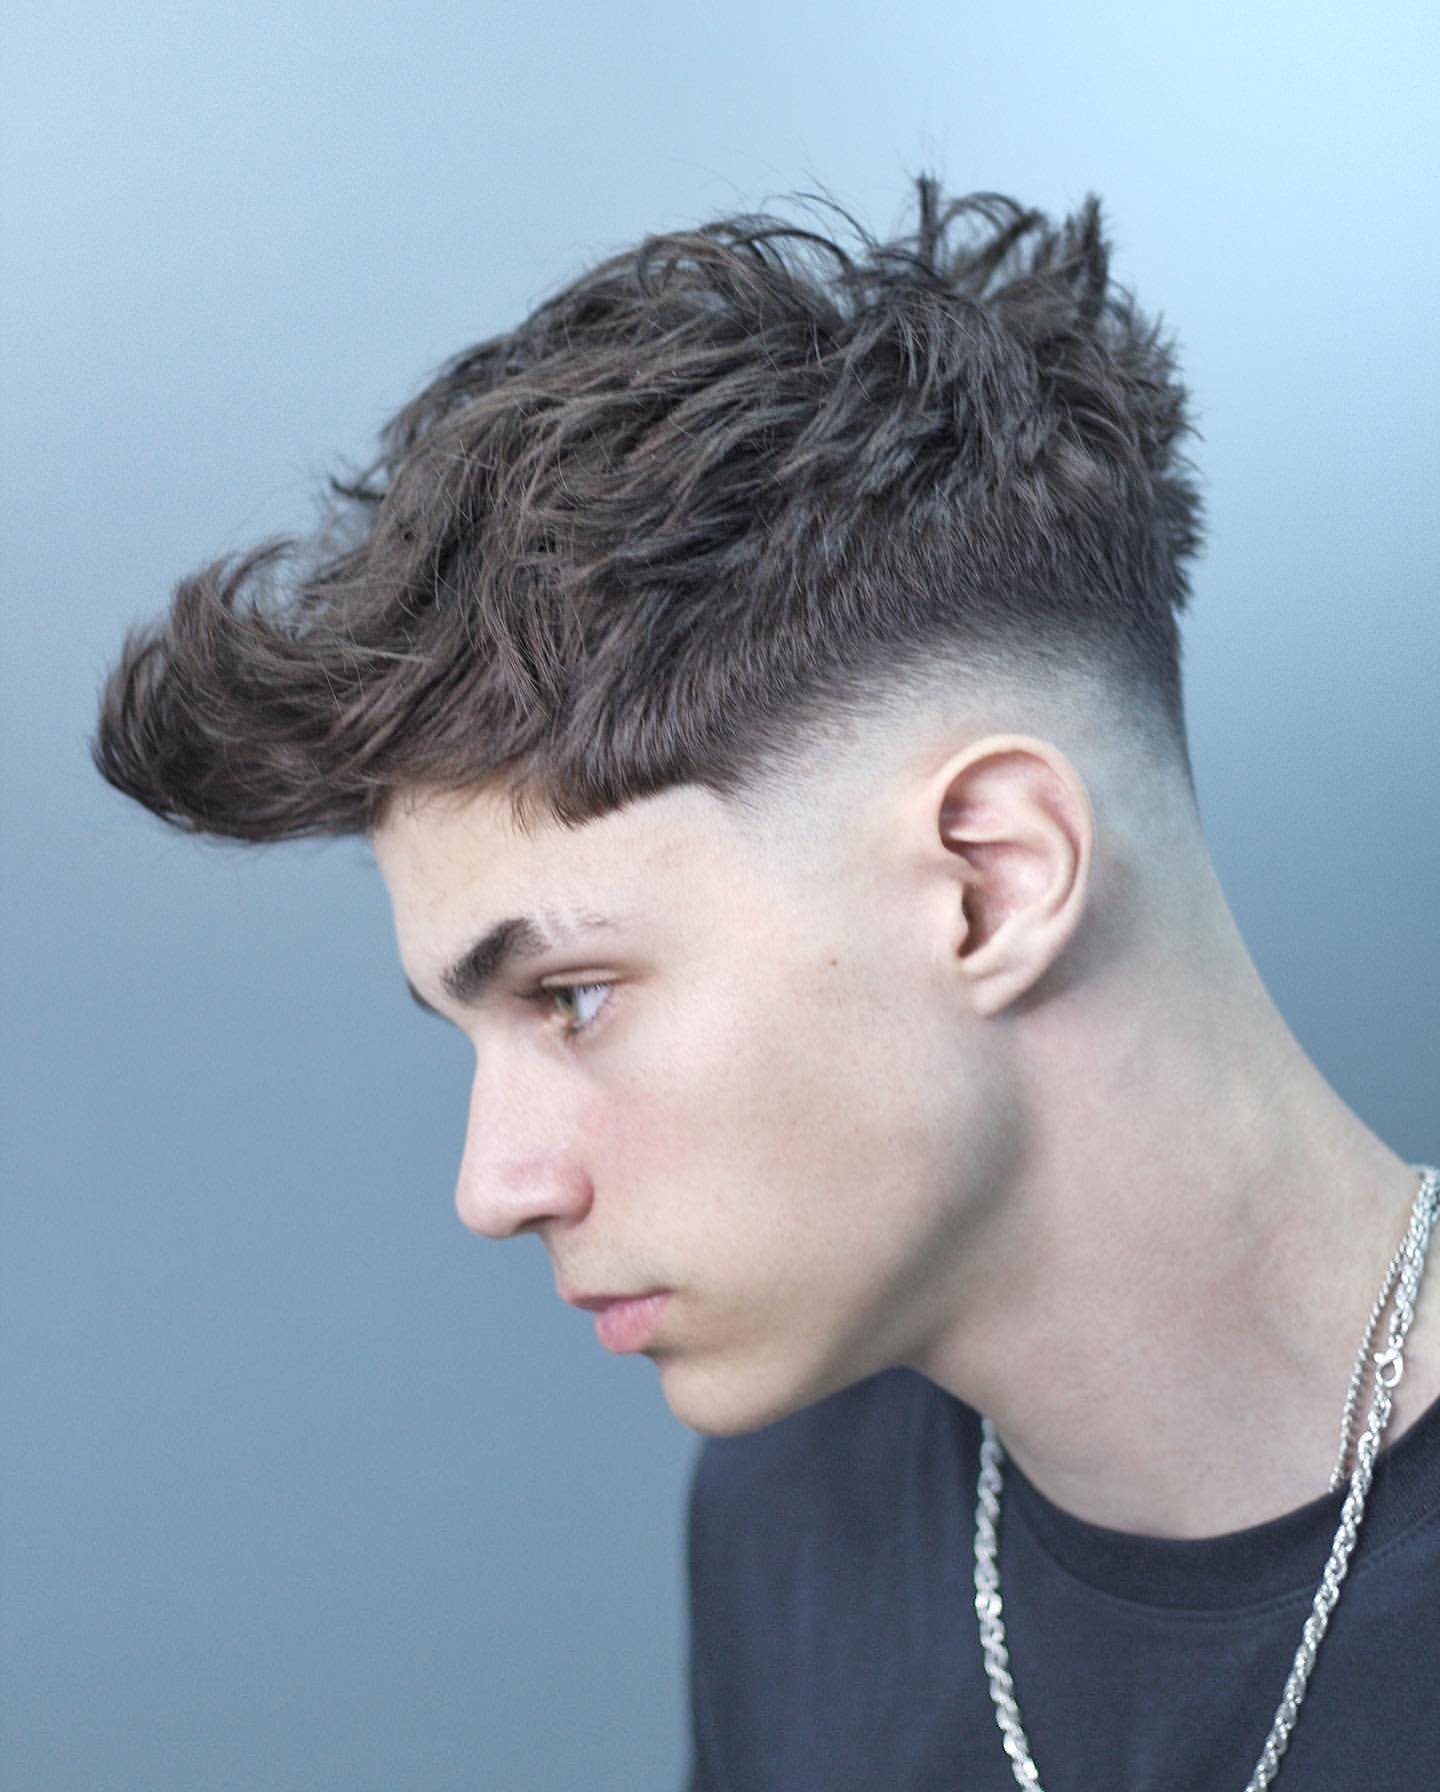 Messy hairstyle for Men 37 Medium messy hairstyles for guys | Messy fade haircut | Messy hairstyles for medium hair Messy hairstyles for Men